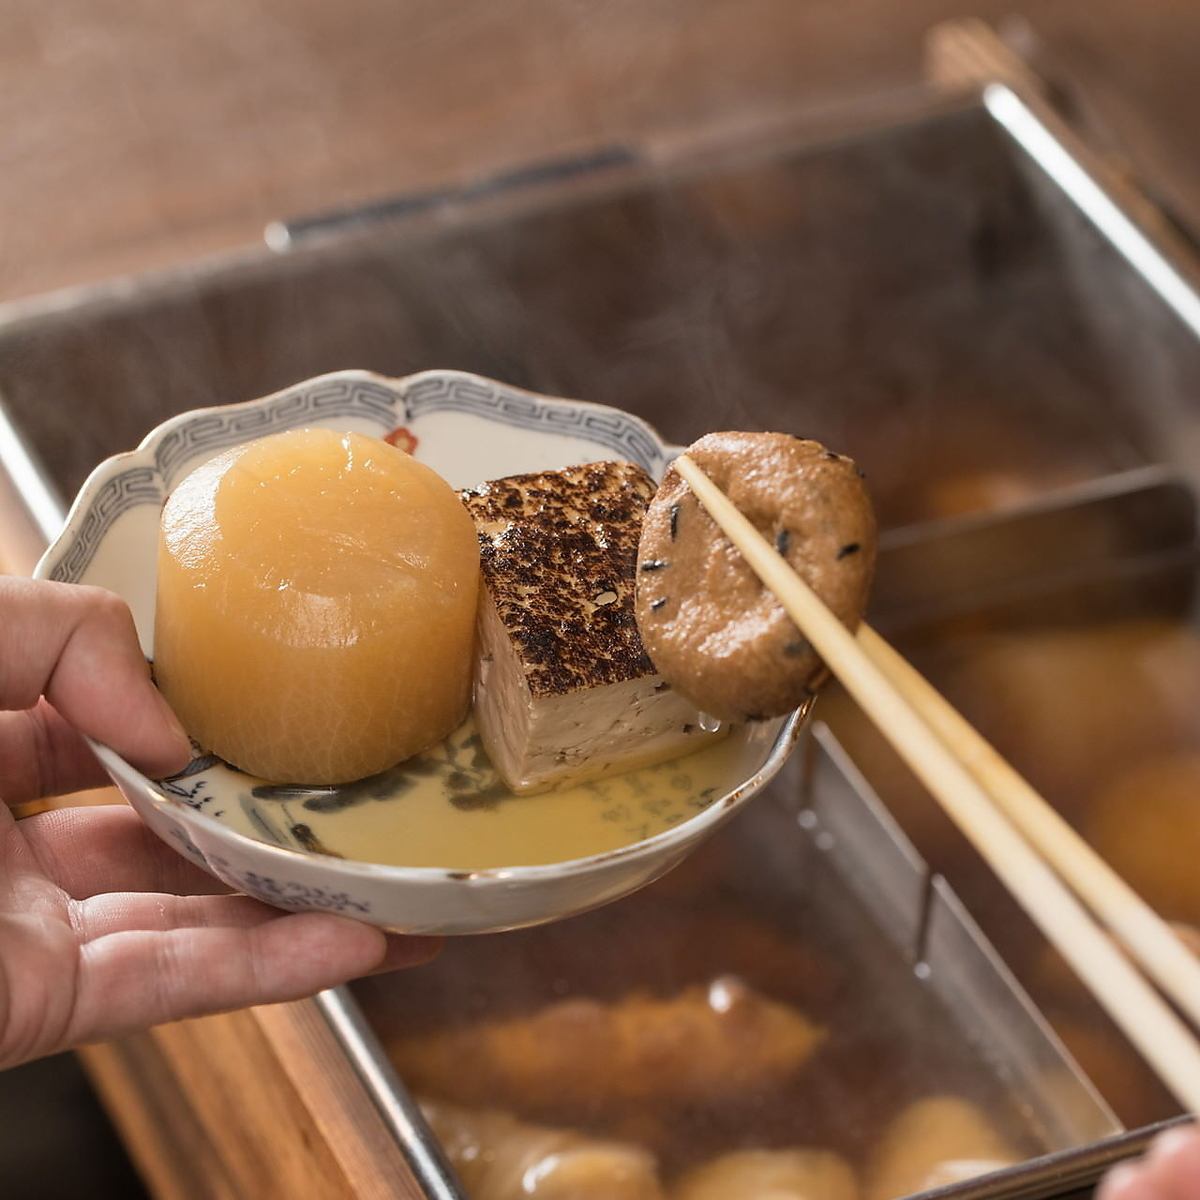 On Saturdays, Sundays, and holidays, you can drink lunch from 15:00! We recommend stewed wagyu beef and exquisite oden.